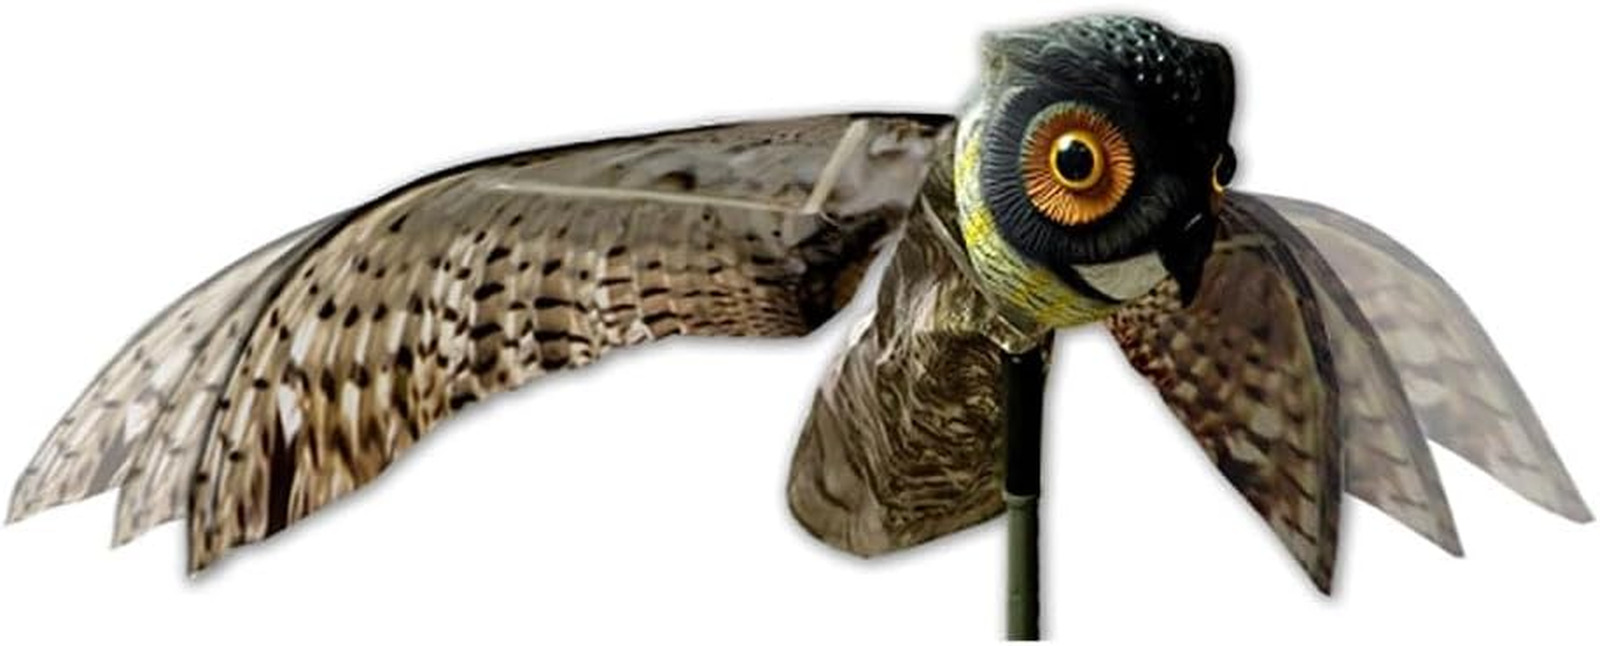 Prowler Owl, Lifelike Owl Decoy with Glassy Eyes and Moving Wings